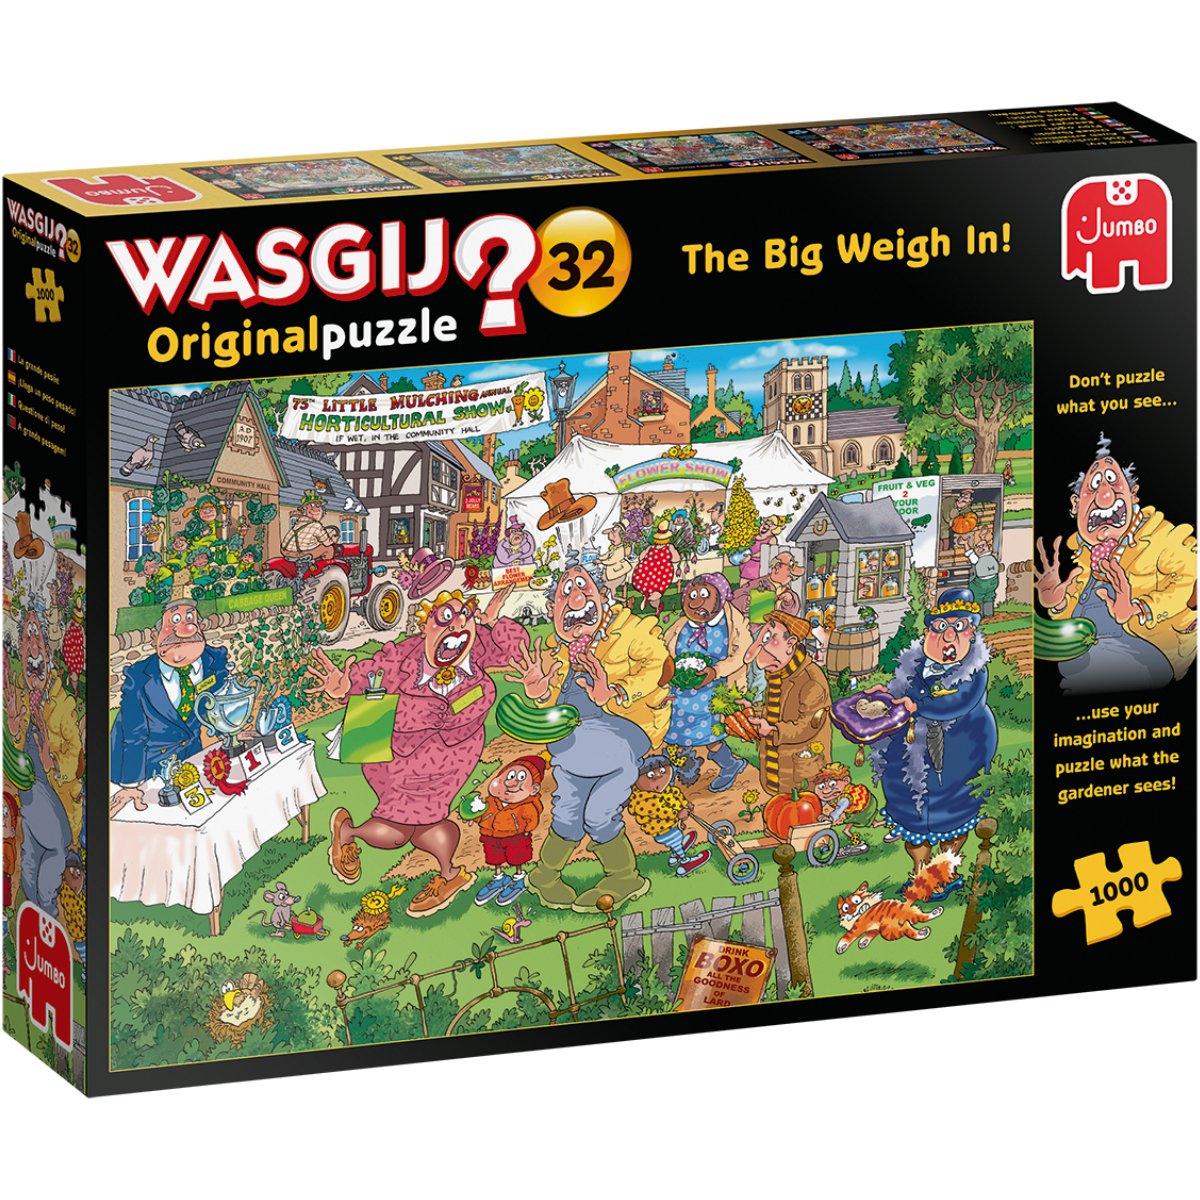 Wasgij Original 32 The Big Weigh In! Jigsaw Puzzle (1000 Pieces) - Phillips Hobbies